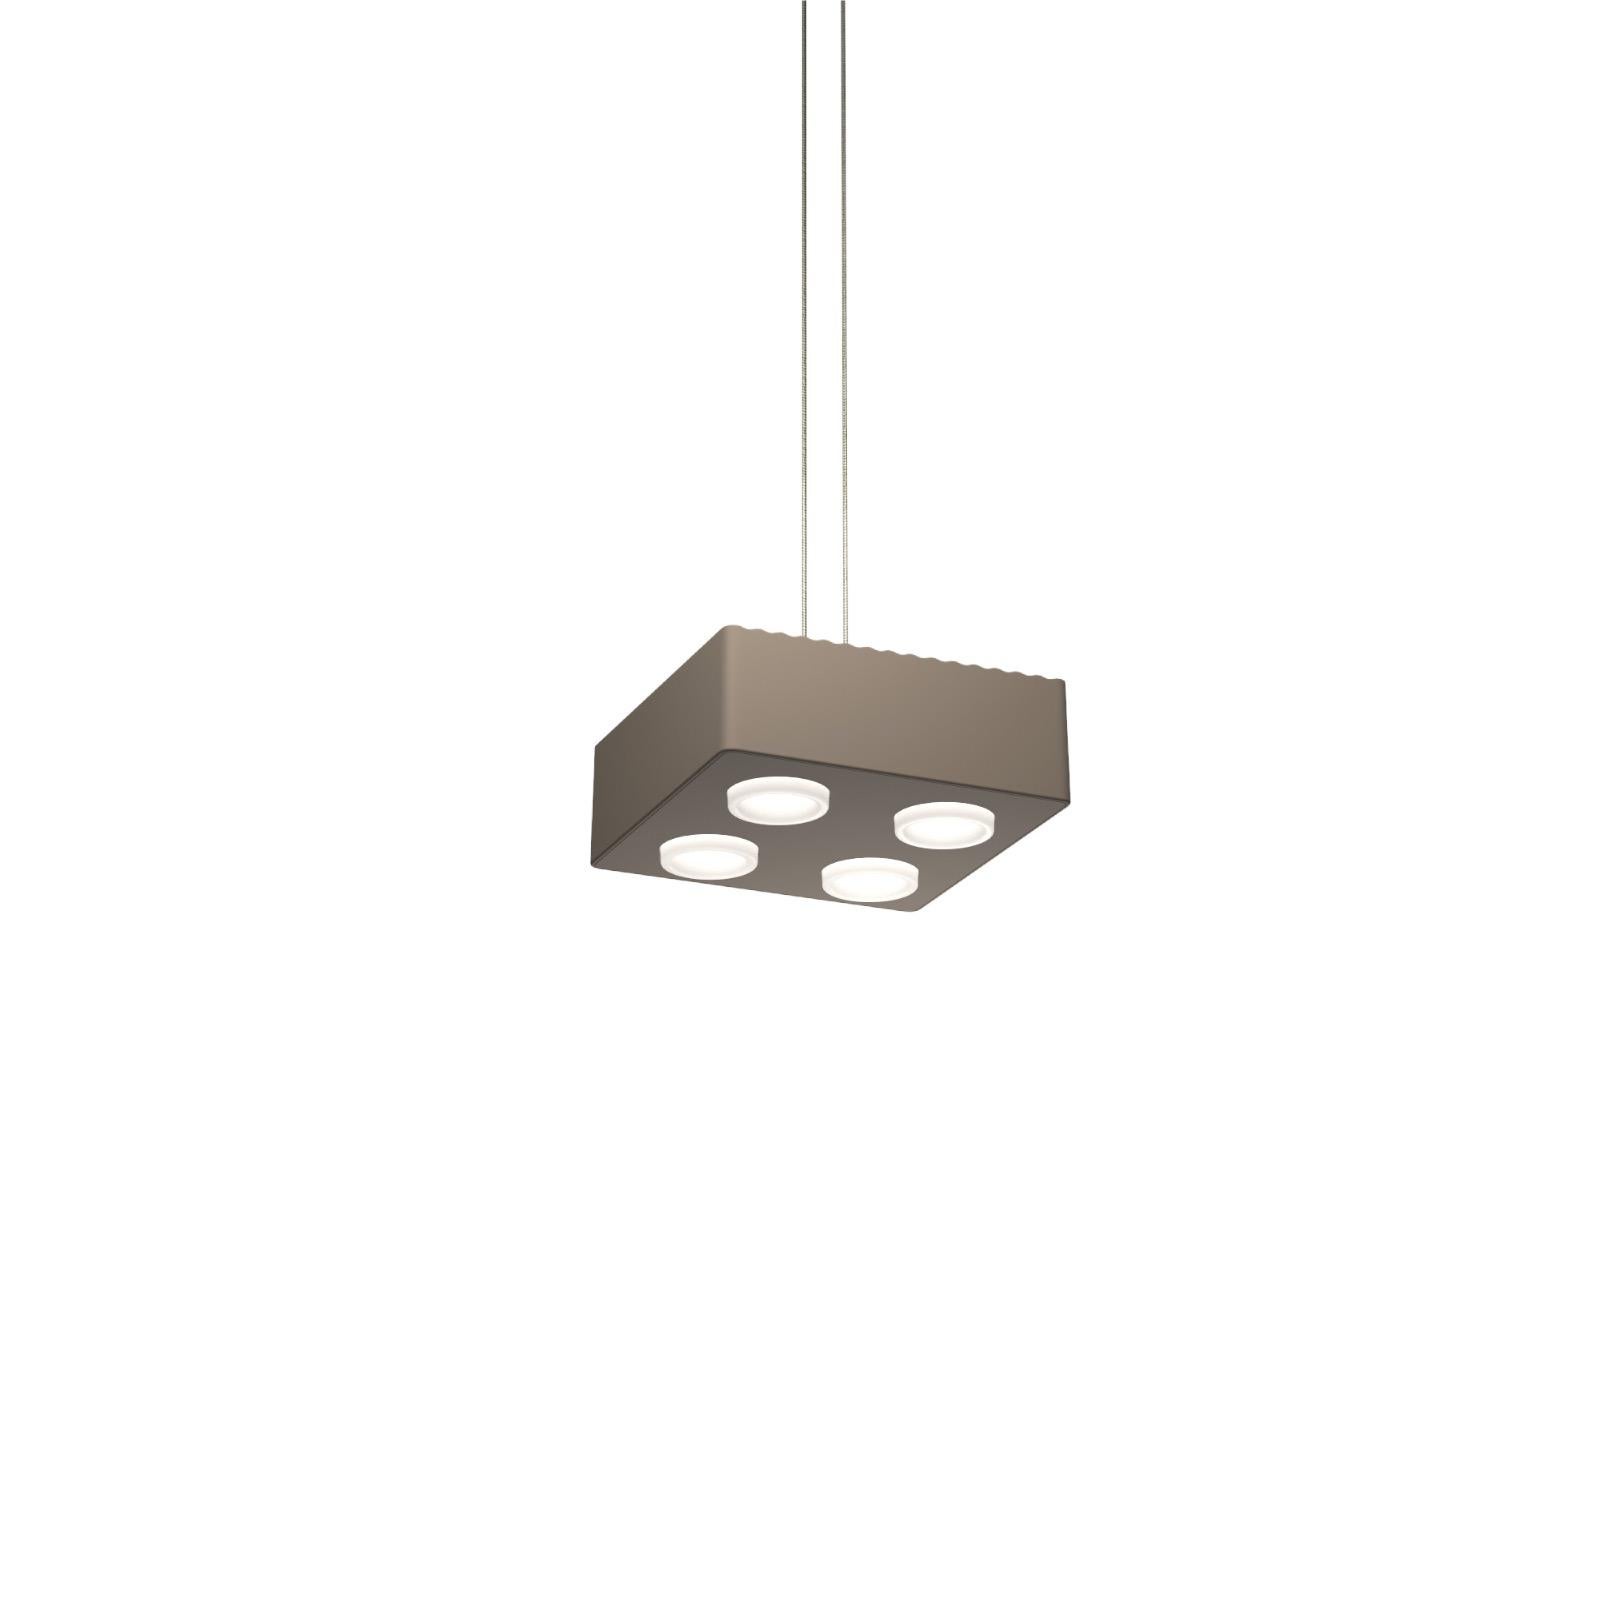 Domino Pendant lamp by Sylvain Willenz x AGO Lighting
Mud Gray - Single Pendant Lamp

Materials: Aluminum 
Light Source: Integrated LED (COB), DC
Watt. 15 W
Color temp. 2700 / 3000K
Cable Length: 3M 

Available colors:
Charcoal, burgundy,